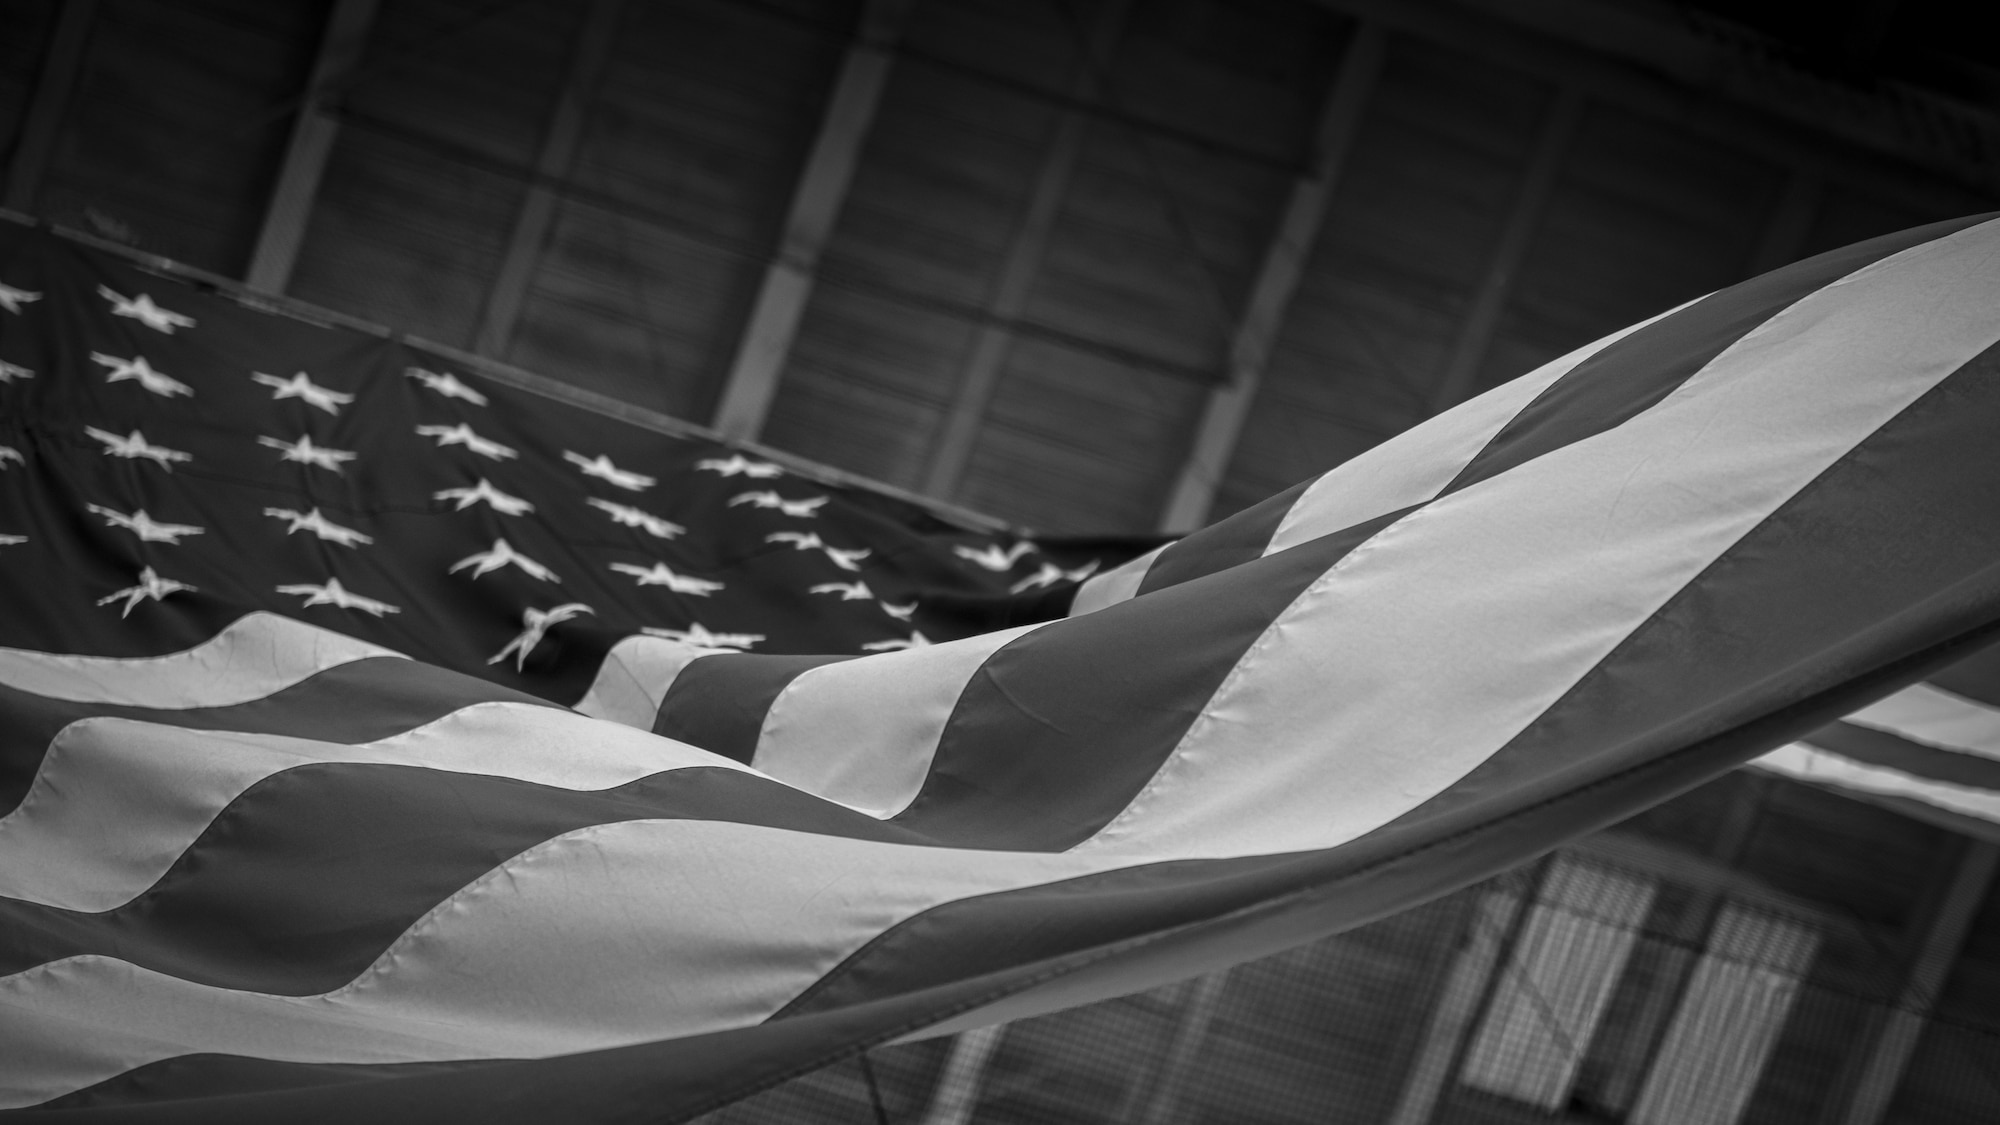 The American flag is displayed in a hangar at MacDill Air Force Base, Florida, April 12, 2023. MacDill is located seven miles south of Tampa, Florida, on the southwestern tip of the Interbay peninsula in Hillsborough County. This area once had been used as a military staging area during the Spanish-American War but did not become a military installation until much later. (U.S. Air Force photo by Senior Airman Lauren Cobin)